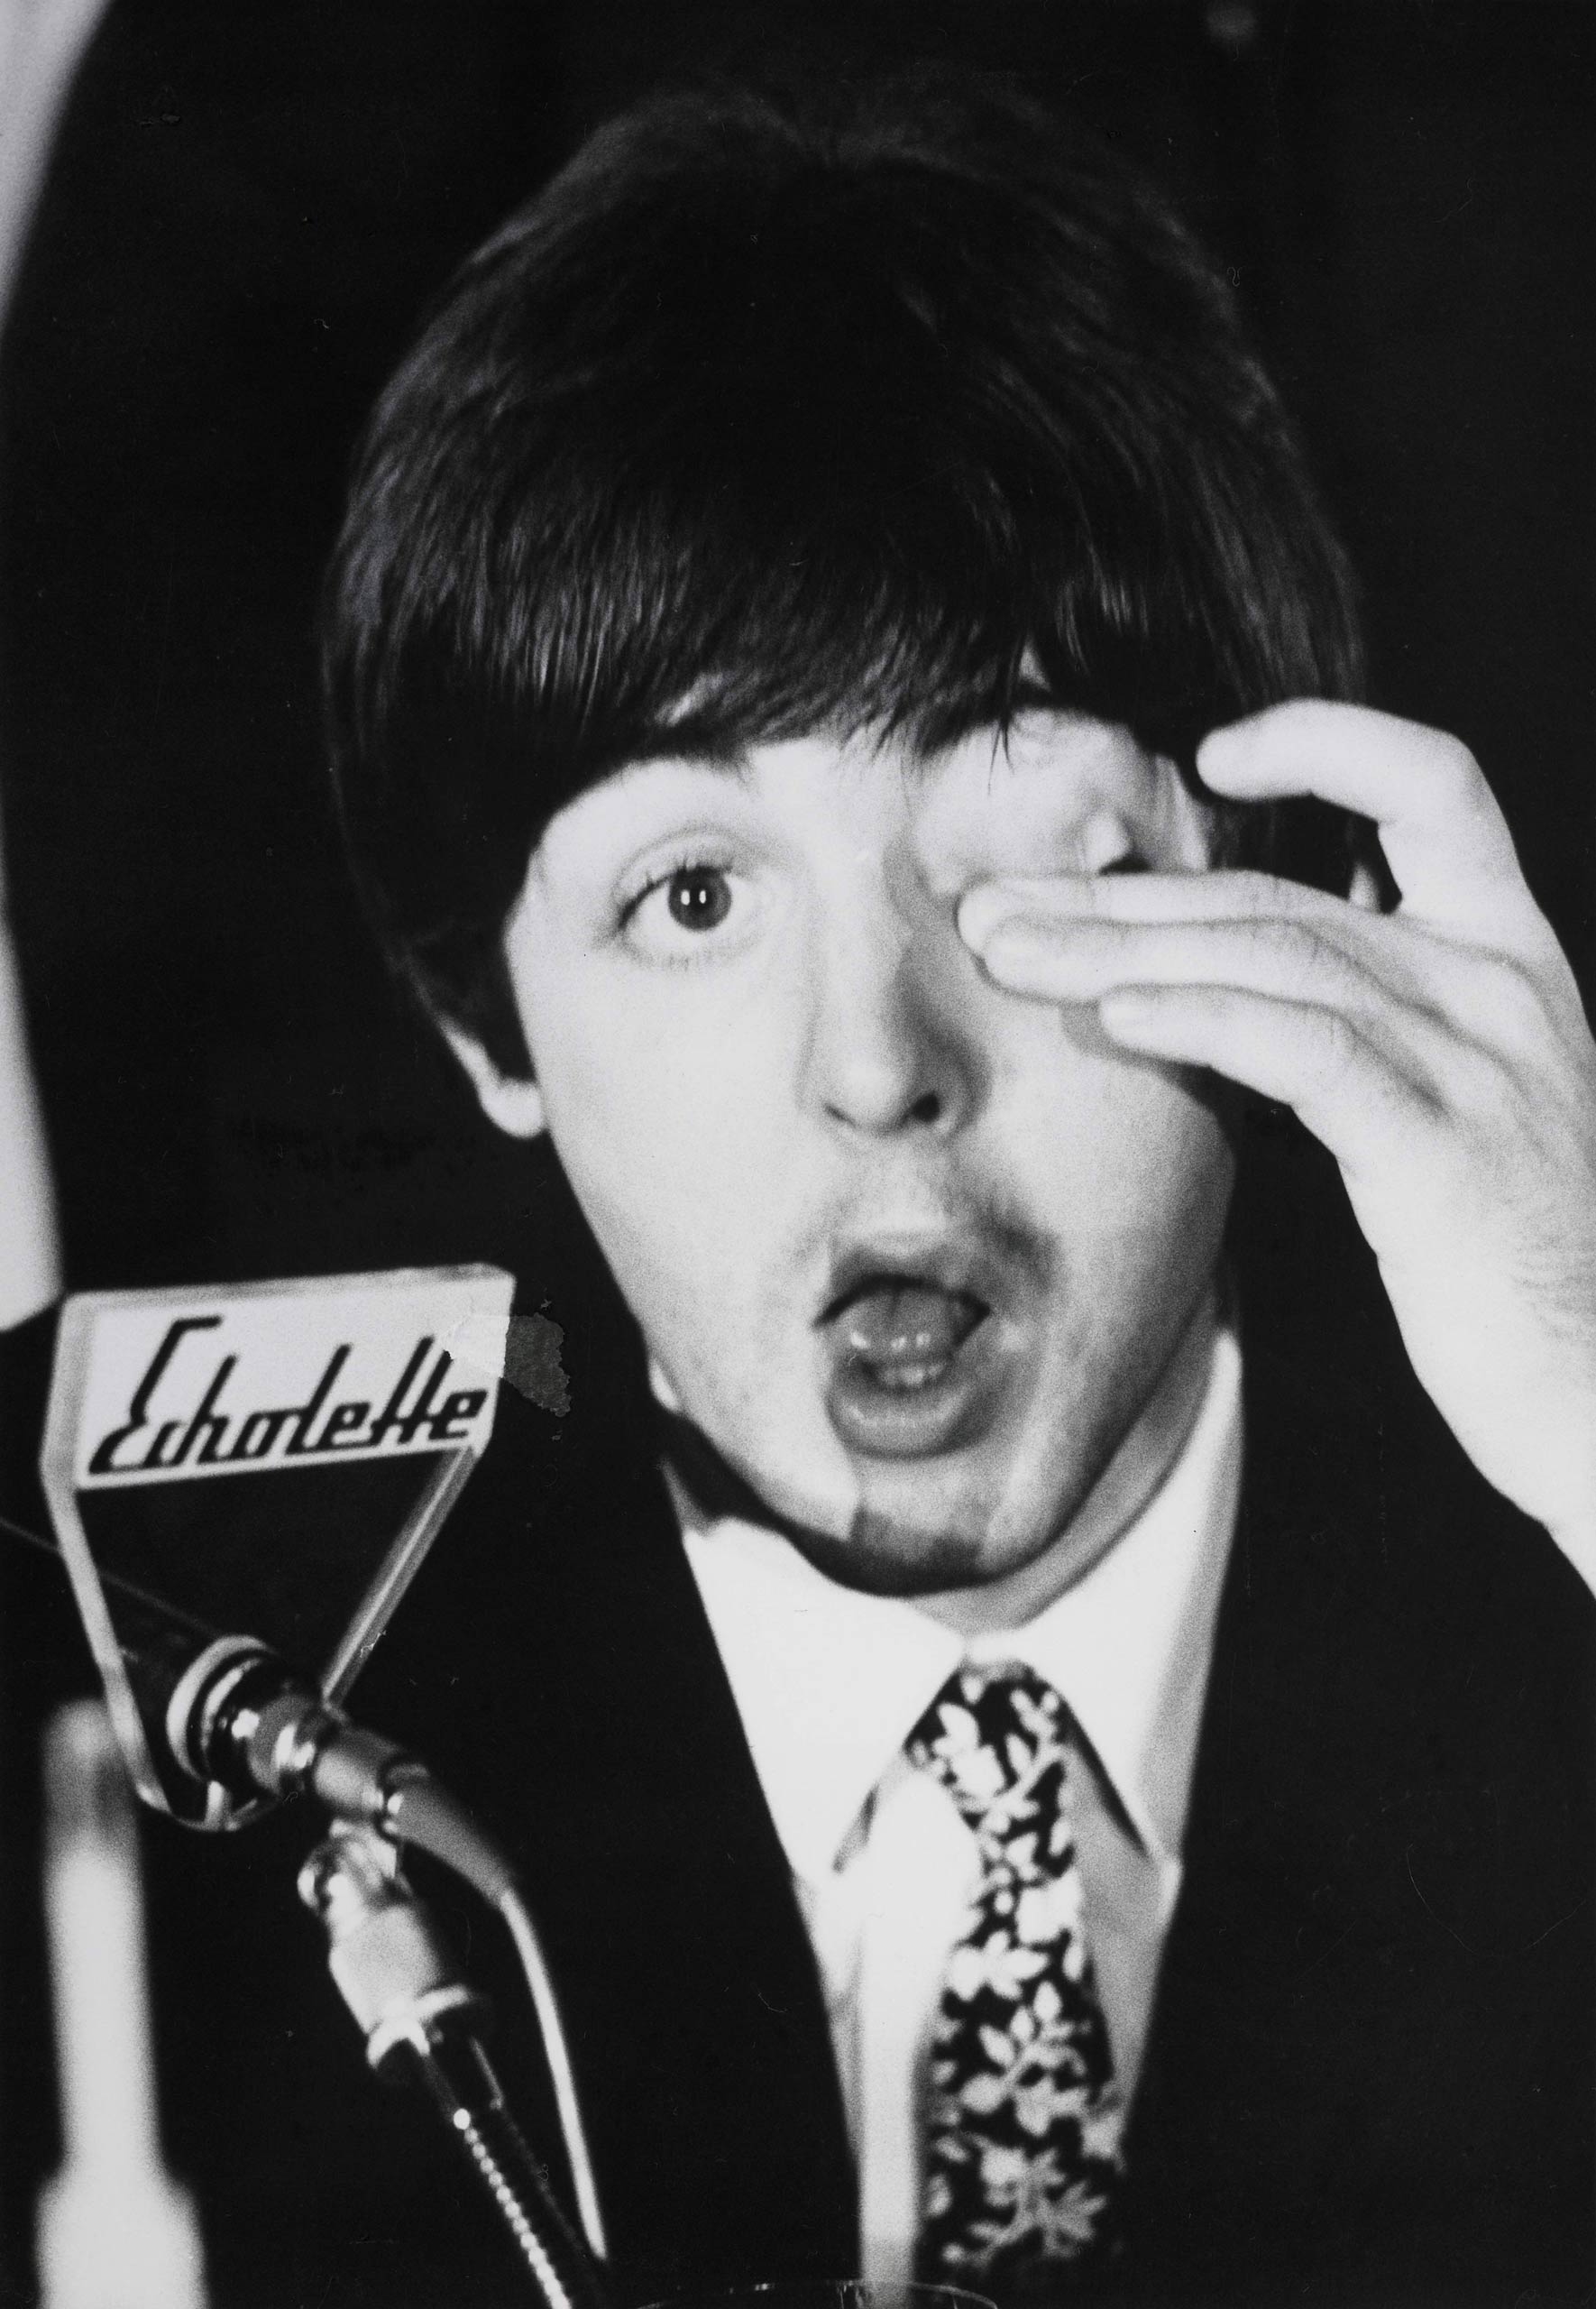 Paul McCartney poses at a press conference in Germany.